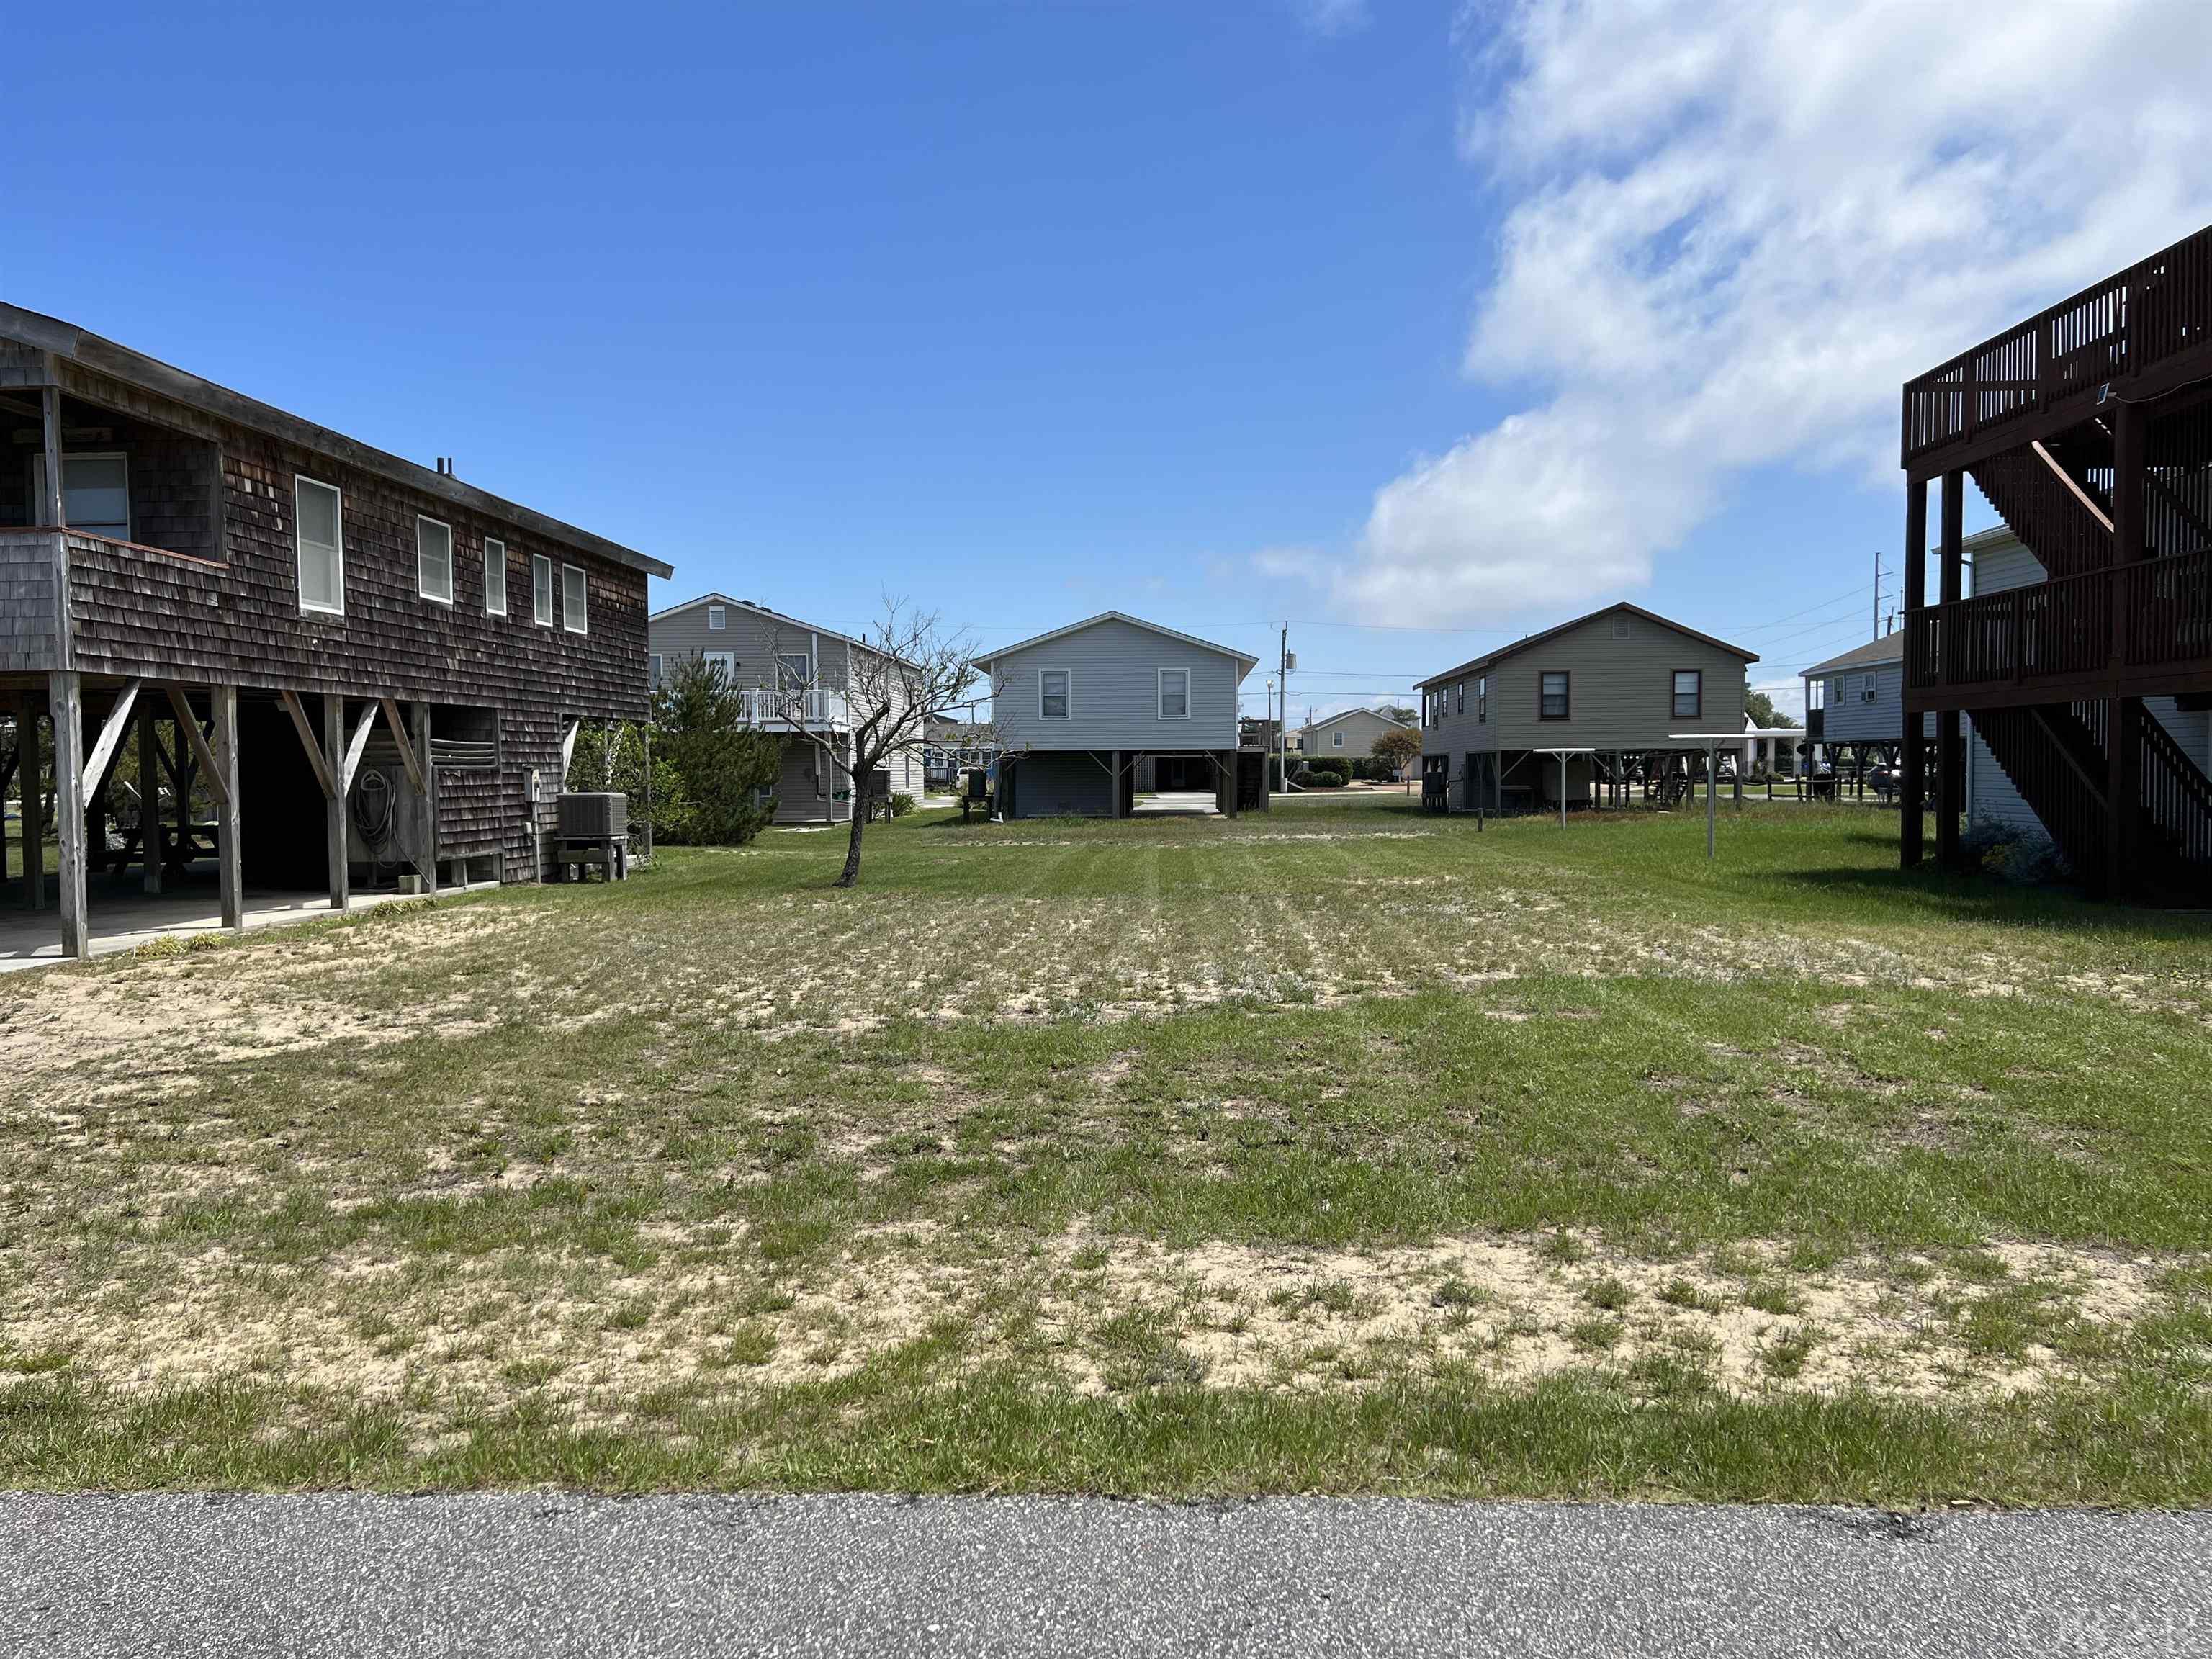 Outstanding building site in Kill Devil Hills between the highways! LEVEL &  CLEAR! Wonderful location just one block north of the Ocean Bay Lifesaving Station w/BEACH ACCESS & the KDH bath house w/outdoor showers!  Super close to the Wright Brothers Memorial!! Build your dream Outer Banks beach home on this terrific site!!  50x100, per Dare County!  Check it out!  A rare find!!!